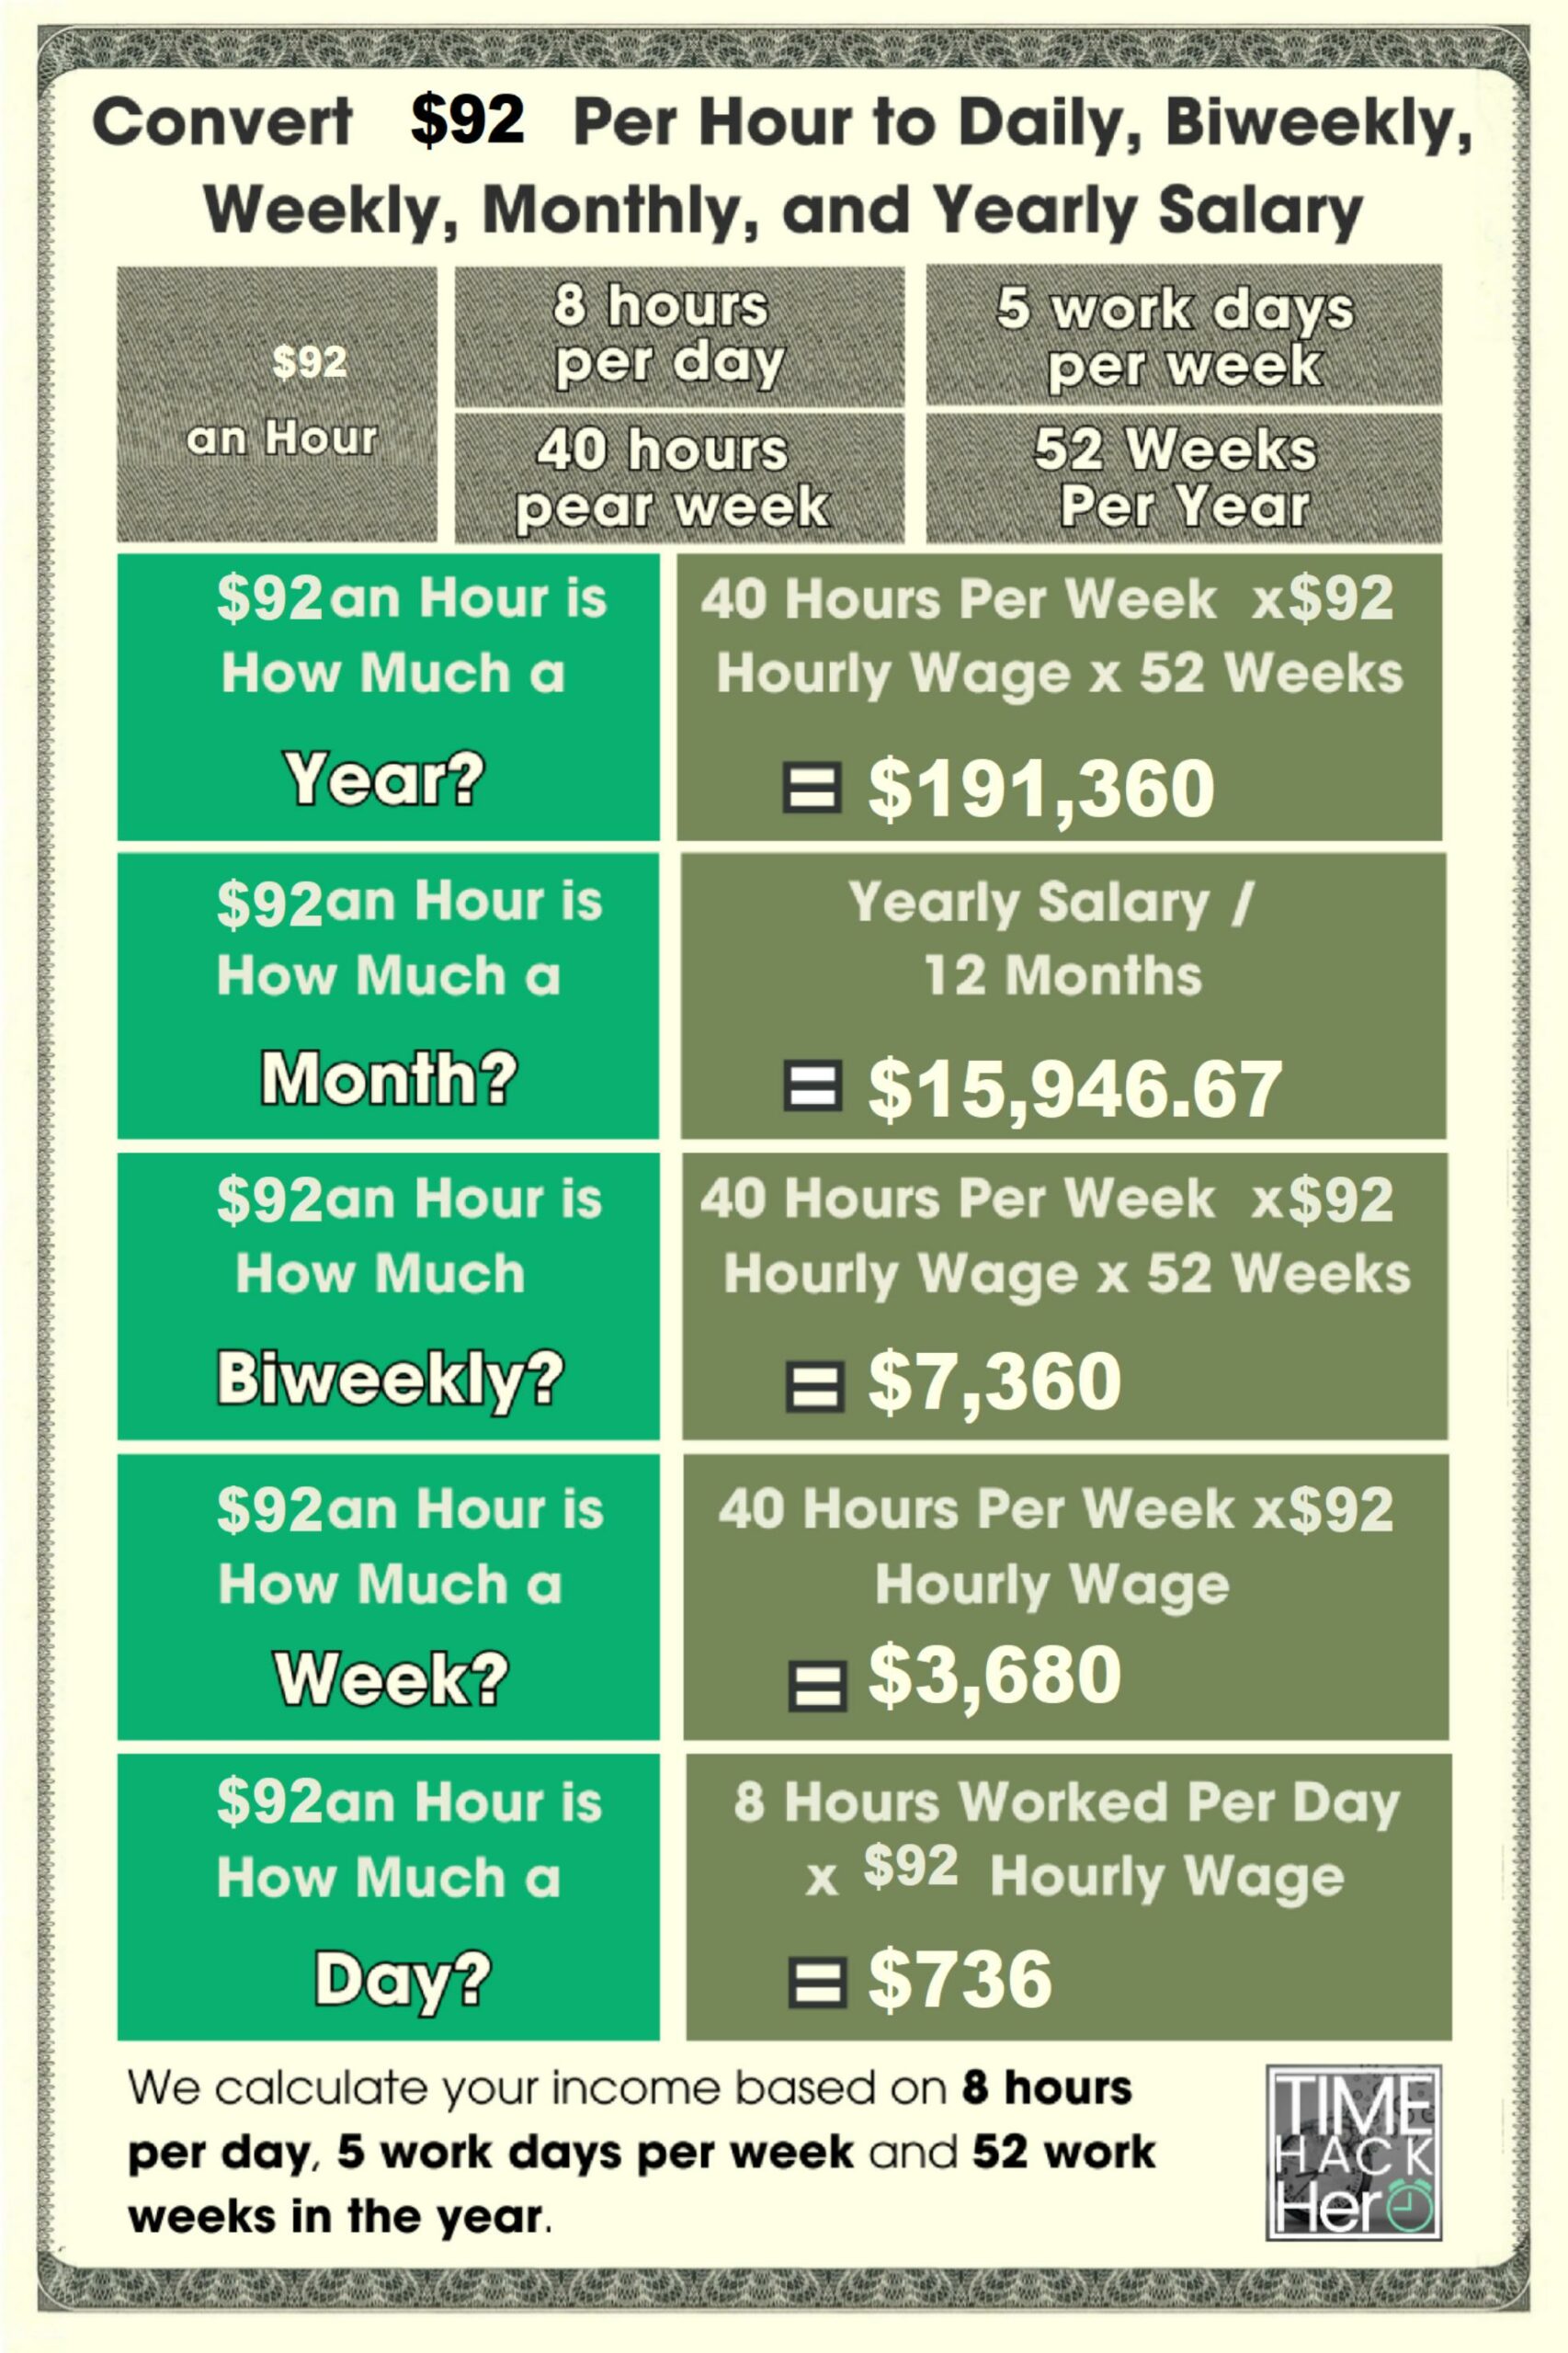 Convert $92 Per Hour to Weekly, Monthly, and Yearly Salary